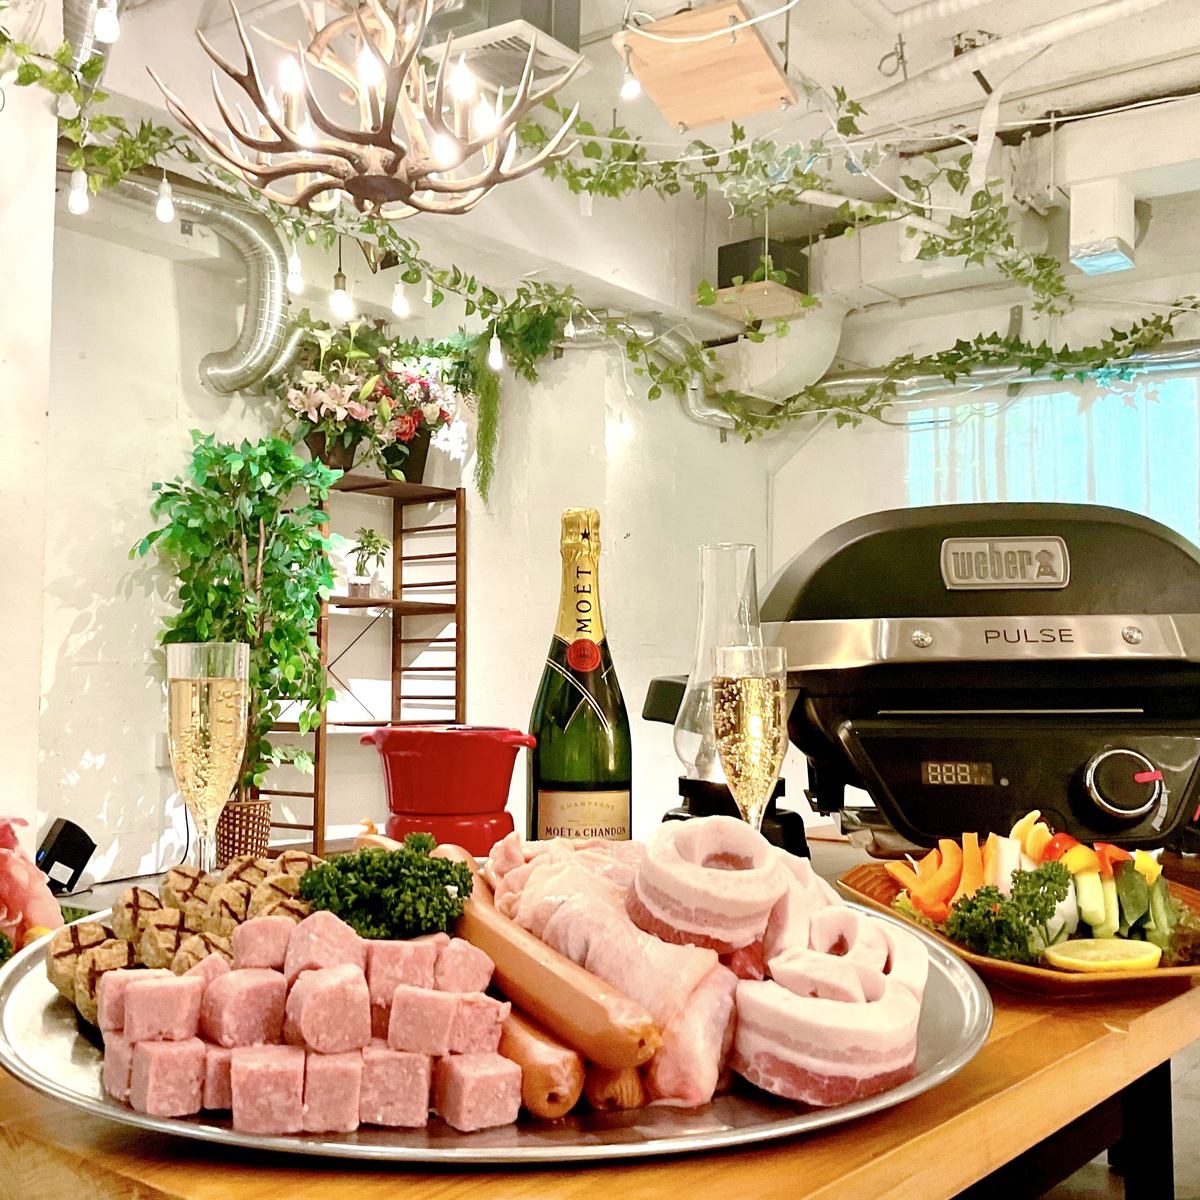 It's an indoor BBQ, so you don't have to worry about the weather or the heat [you can bring your own!] Enjoy a private BBQ near Shibuya Station! *There are 6 affiliated stores around Shibuya Station.